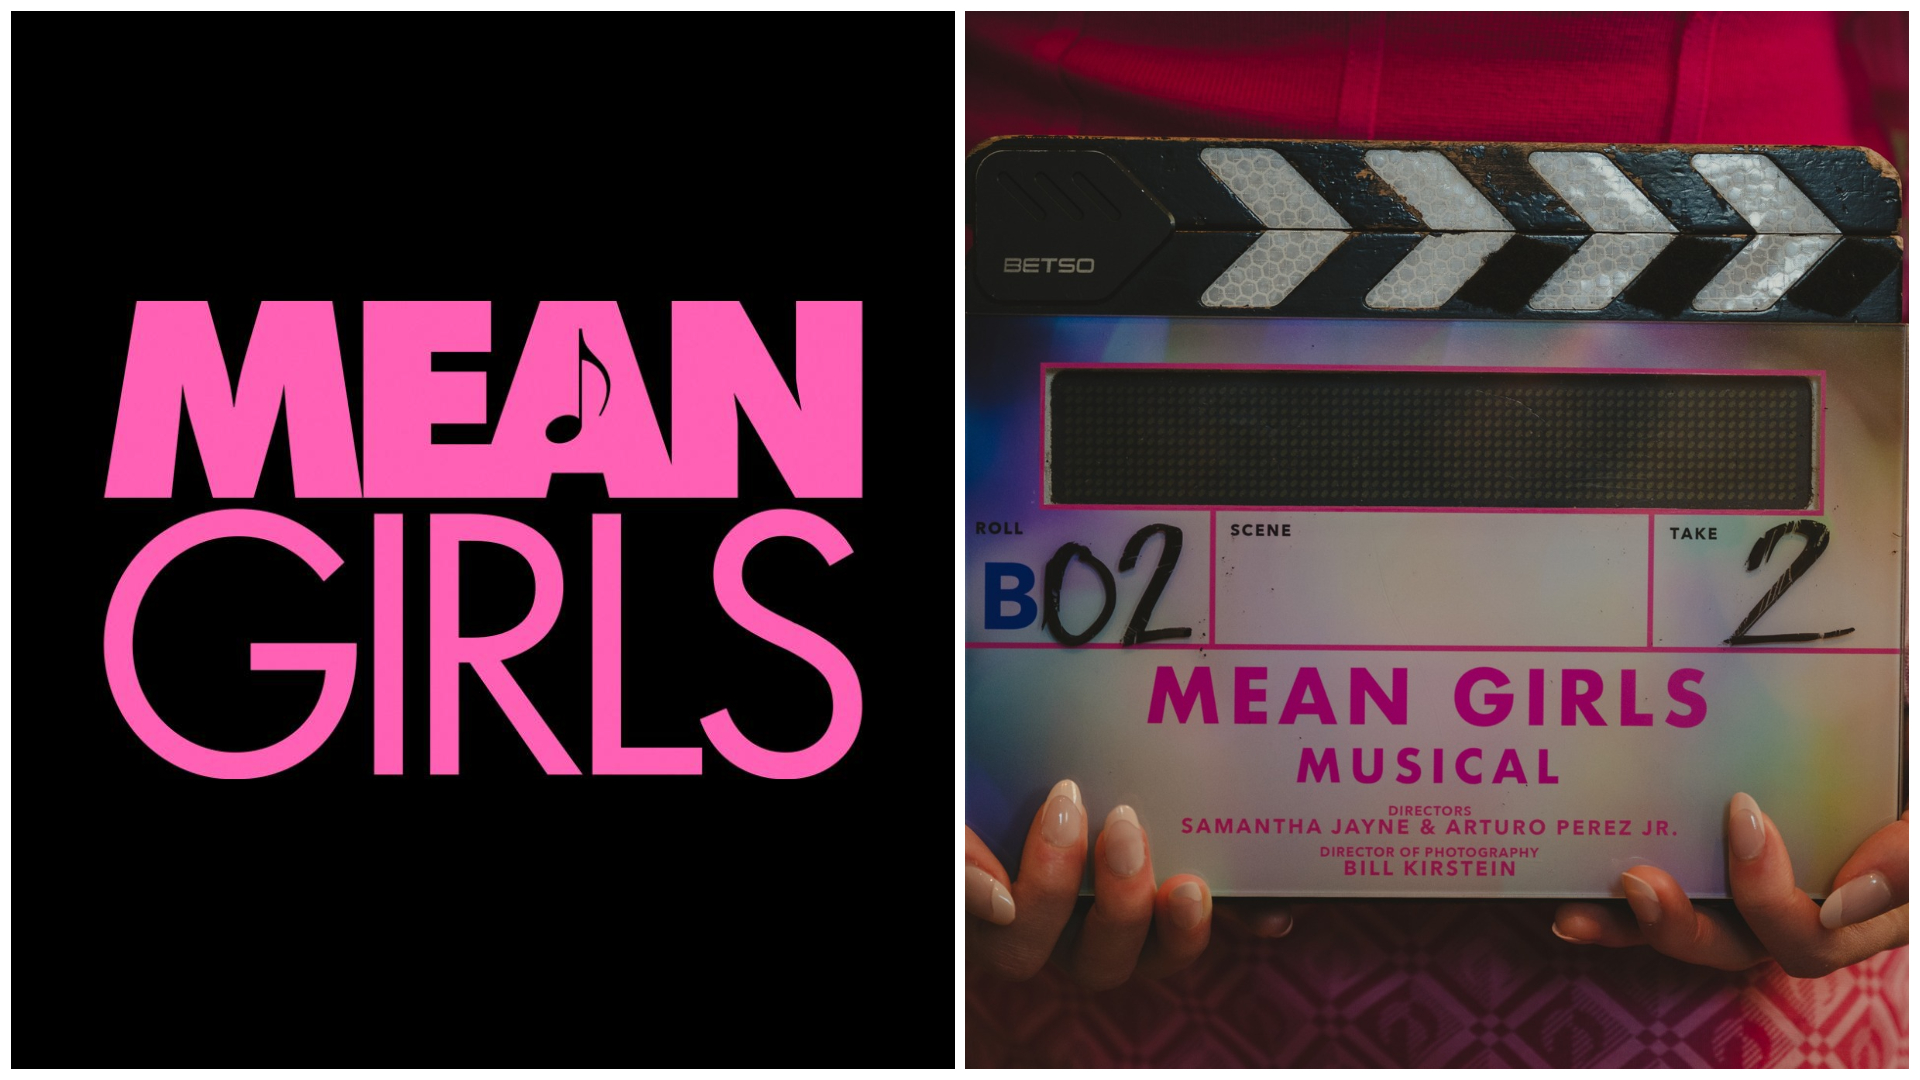 Mean Girls: The Musical sets theatrical release date- Cinema express